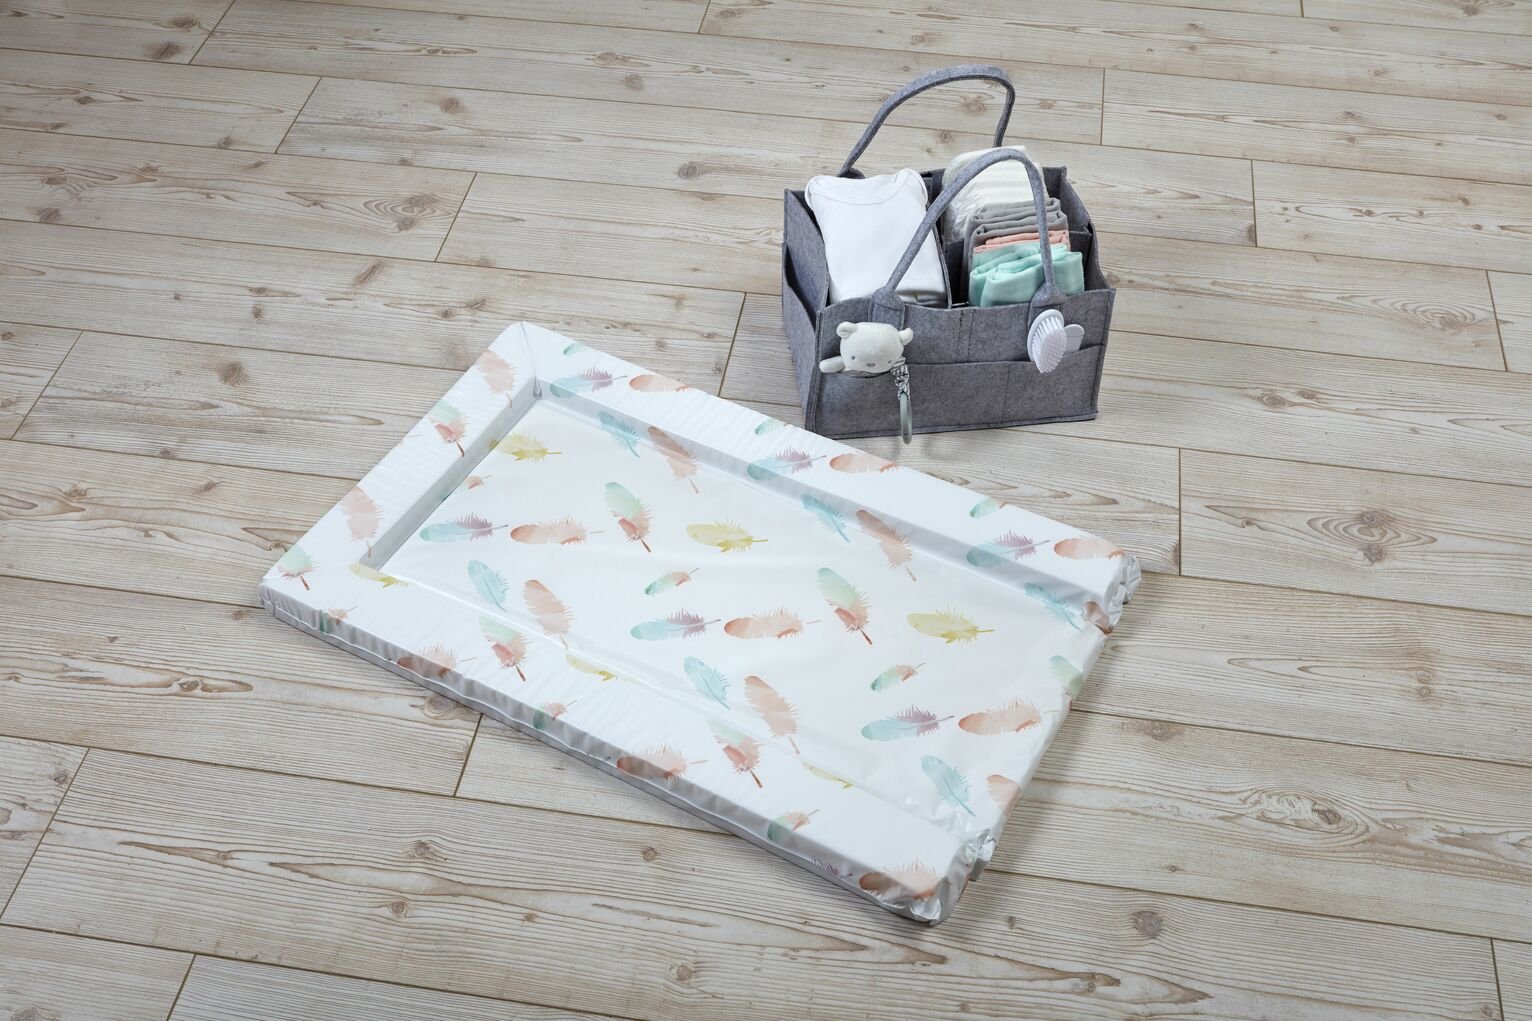 East Coast Nursery Feathers Changing Mat Review